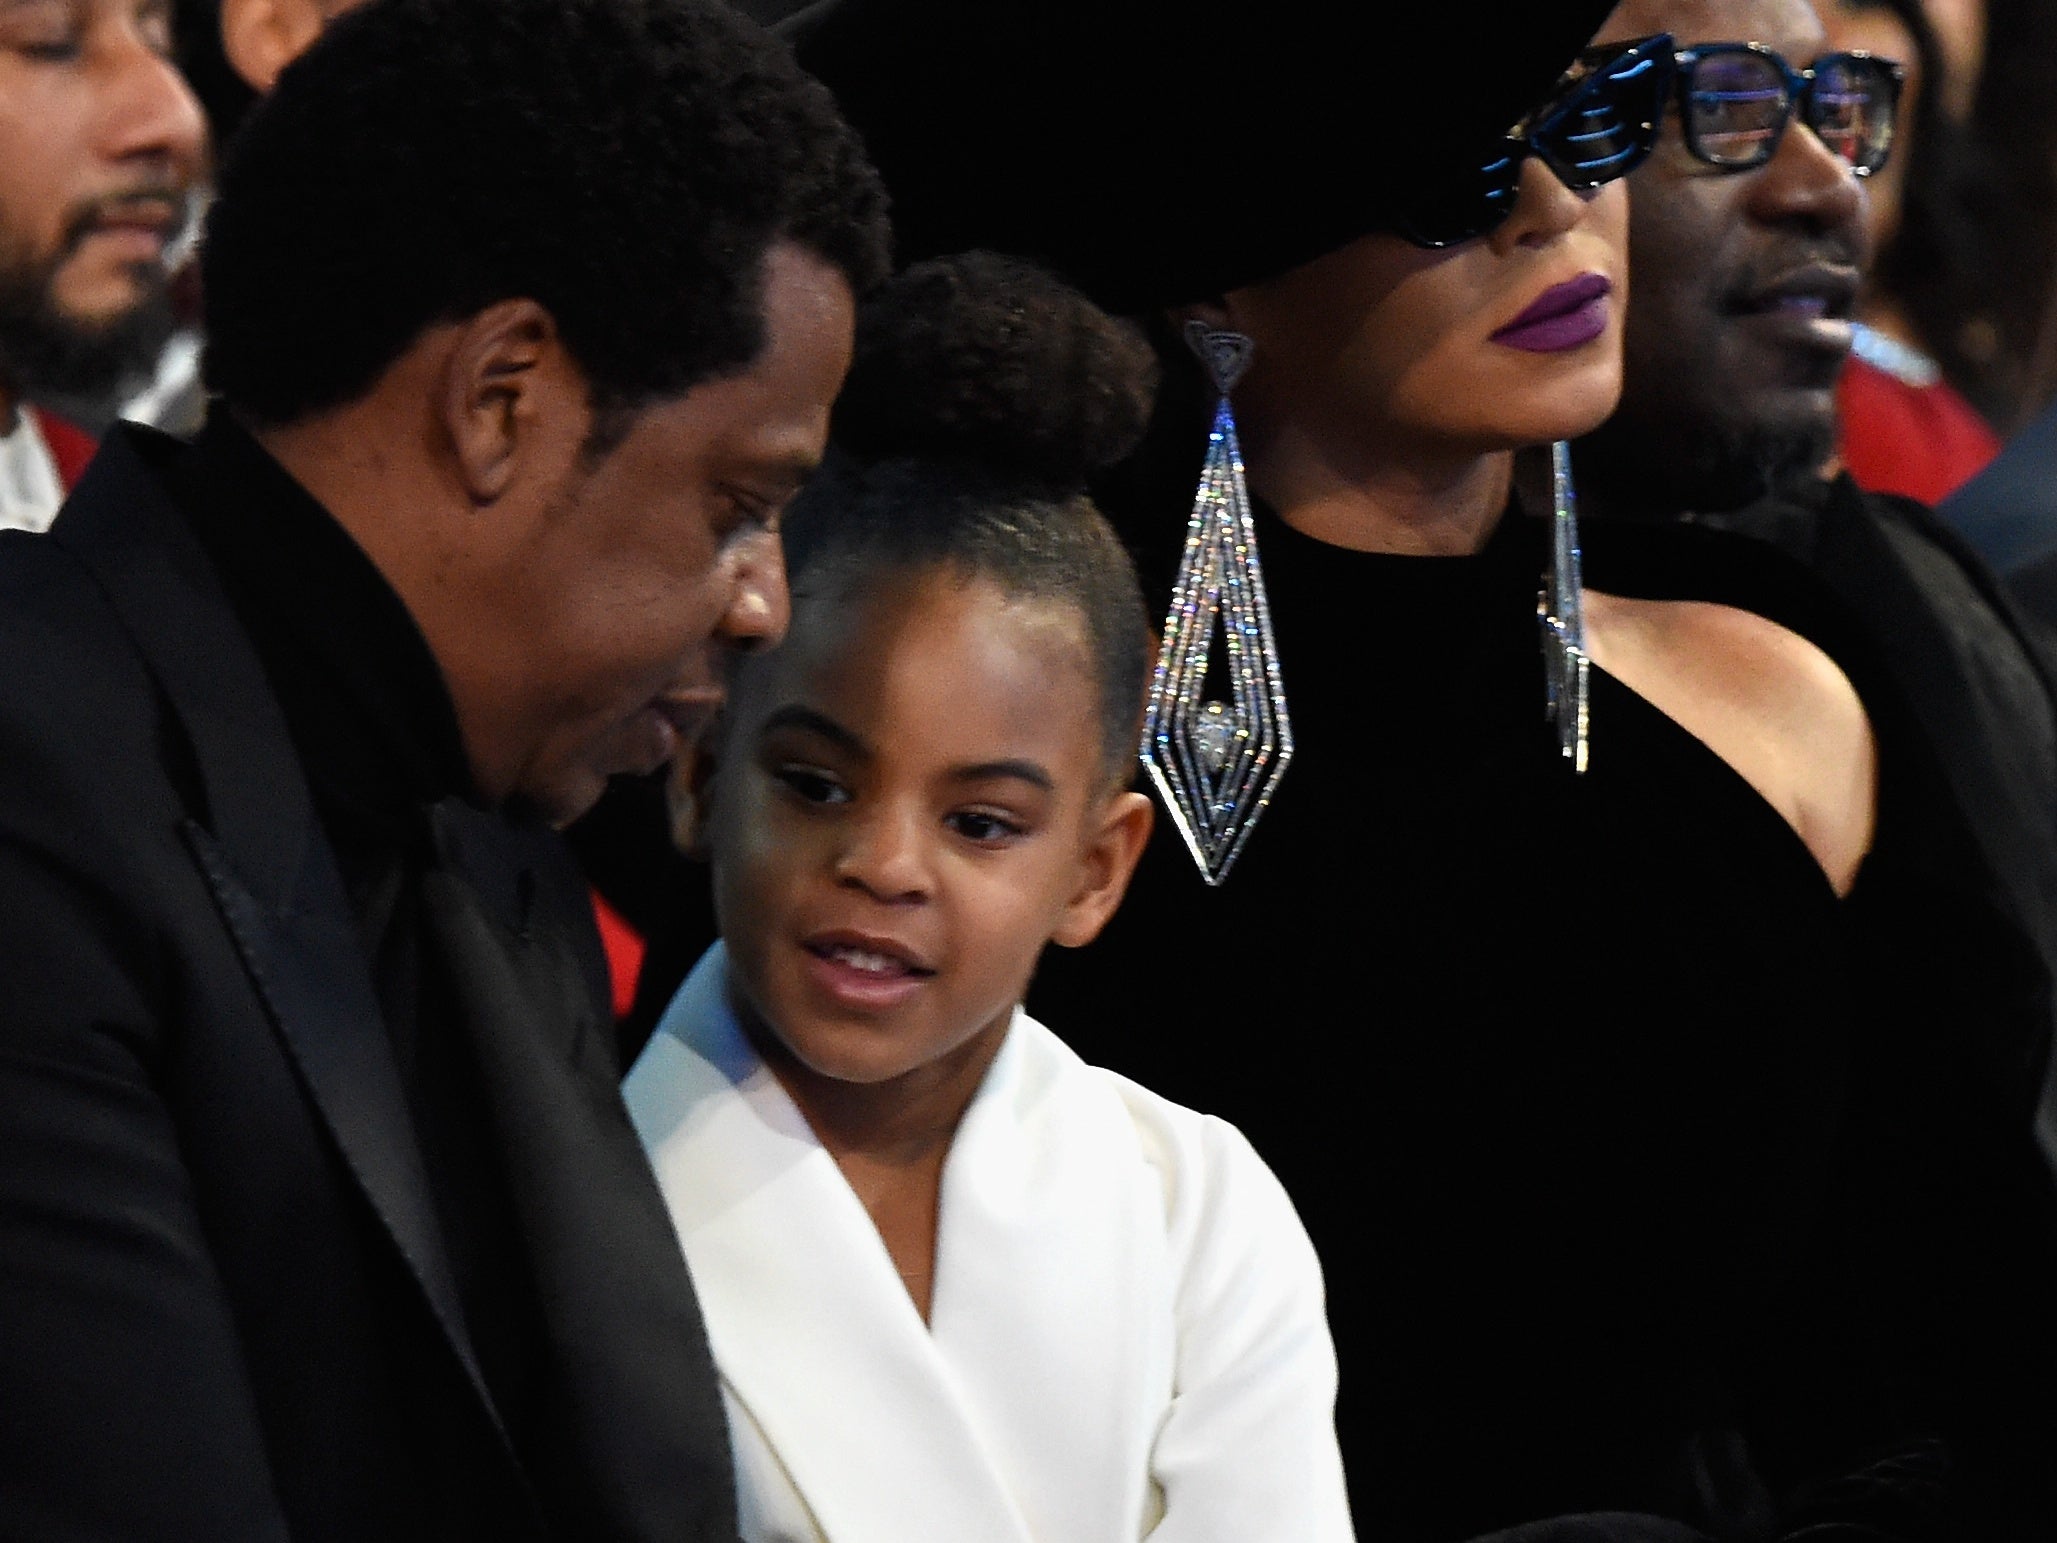 Beyonce and Jay-Z's daughter Blue Ivy bids over $80,000 at 2022 Wearable  Art Gala - Good Morning America